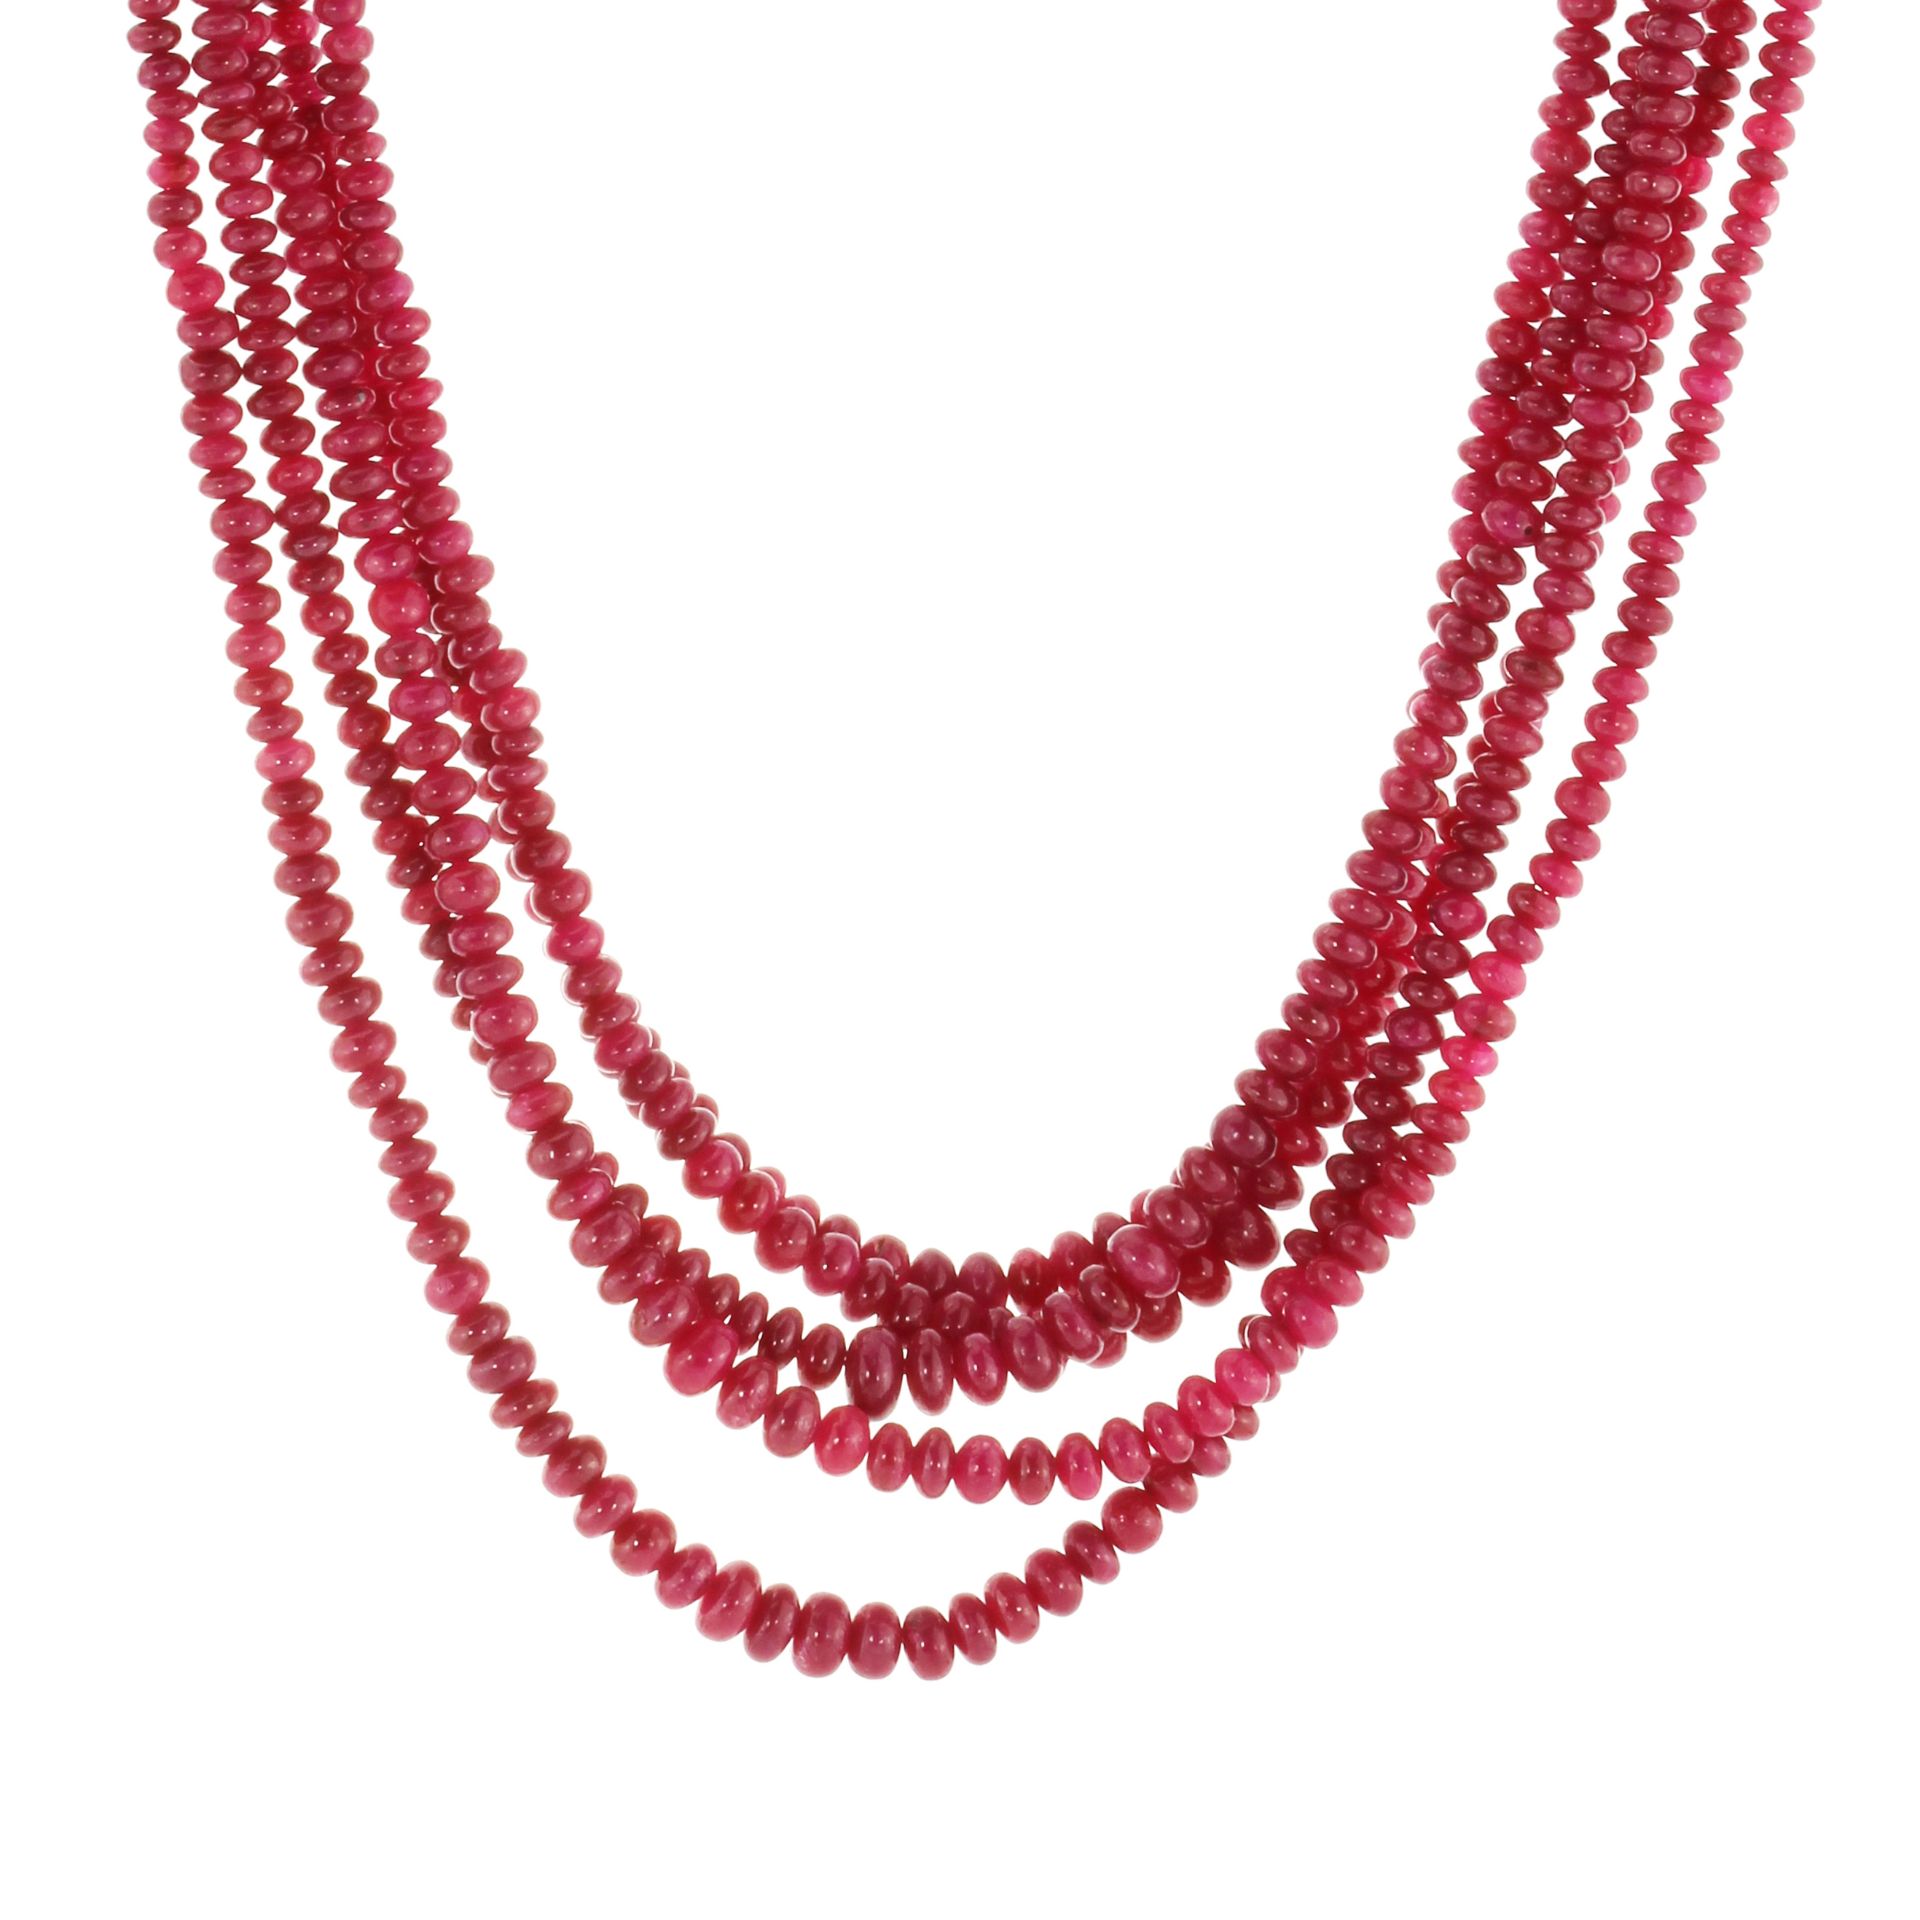 A FIVE STRAND RUBY NECKLACE comprising five rows of graduated polished ruby beads up to 6.5mm in